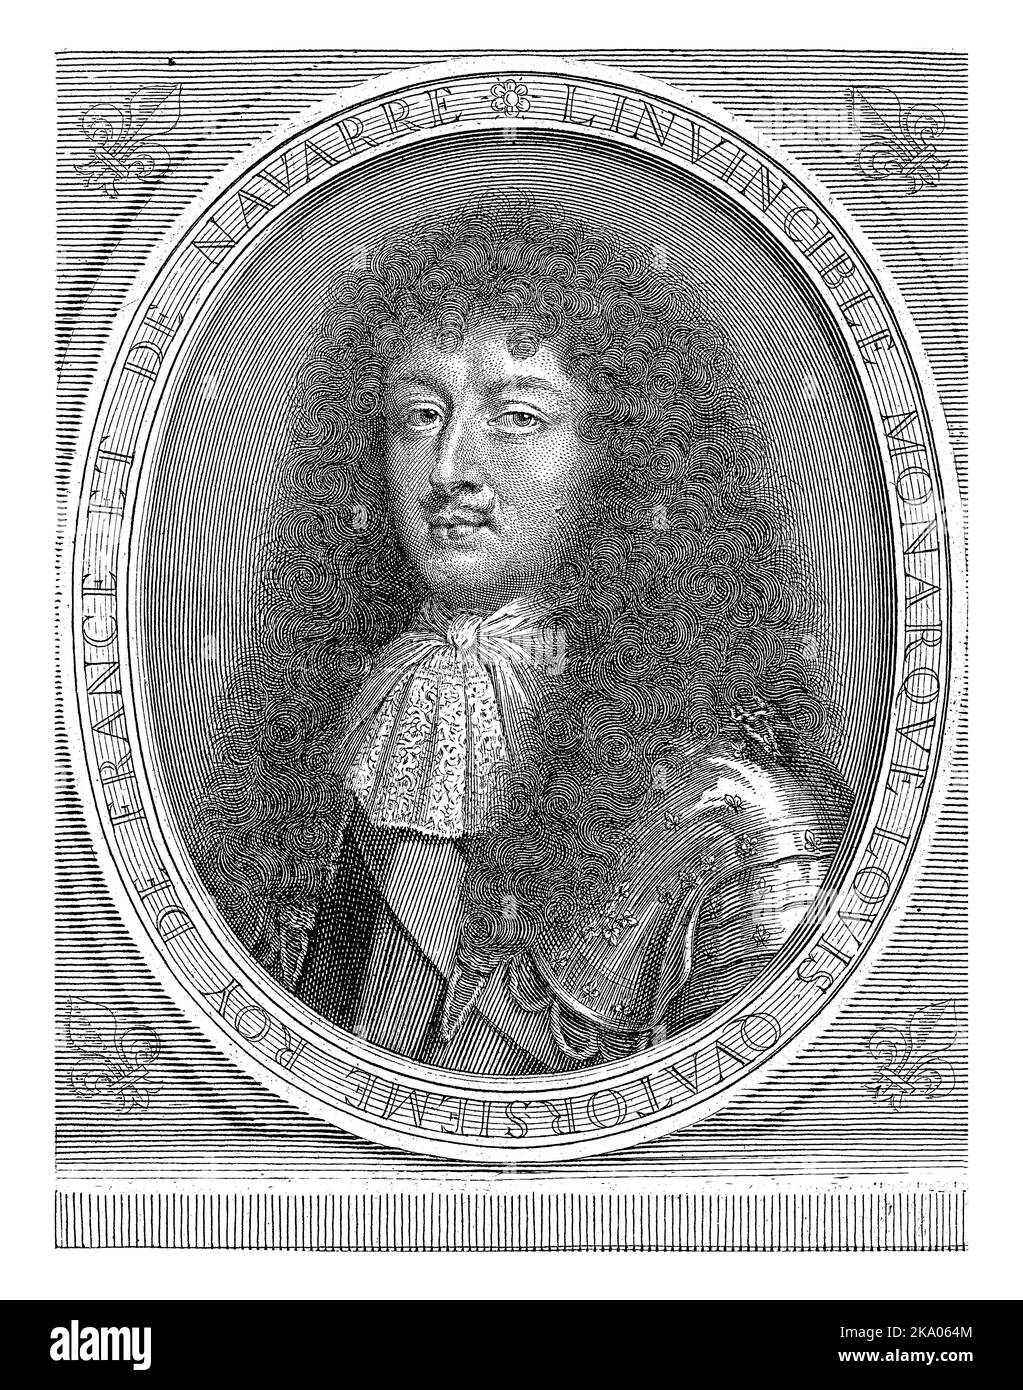 Portrait of Louis XIV, King of France, with Knotted Lace Neckerchief, Pieter van Schuppen, after Claude Lefebvre, 1675 Stock Photo